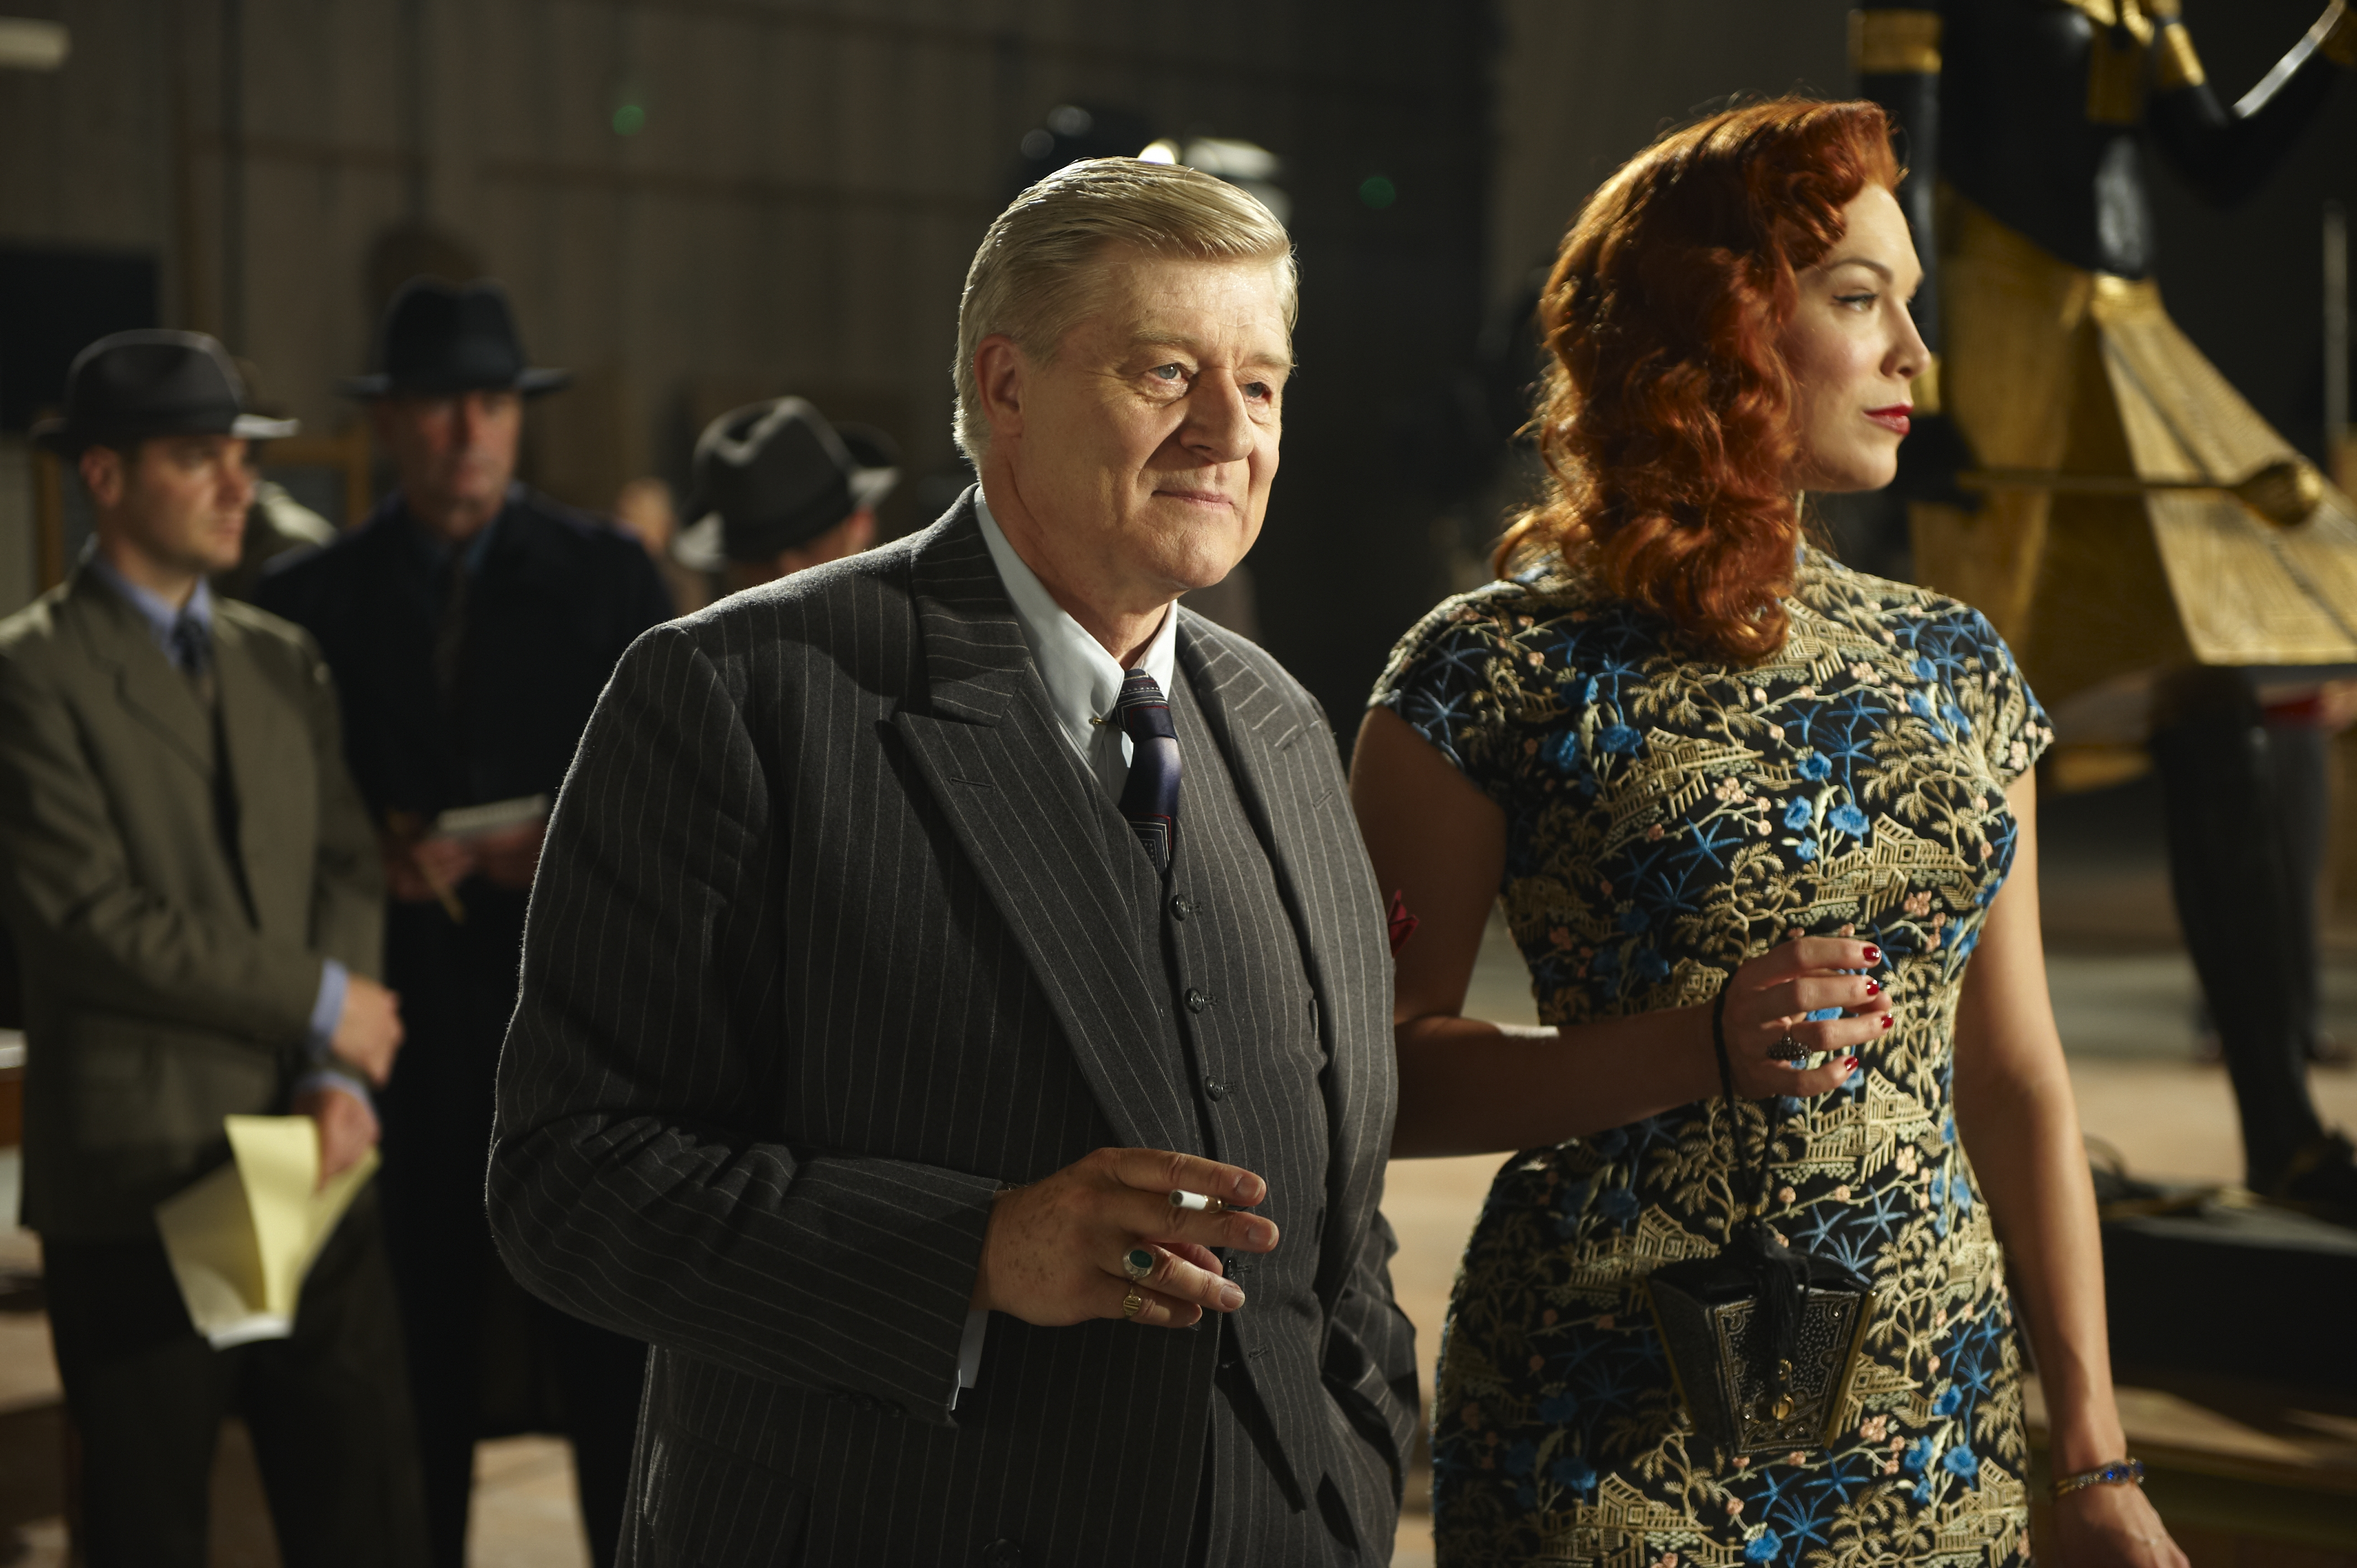 Martin Jarvis in 'Miss Marple: The Mirror Cracked From Side to Side'(2010)